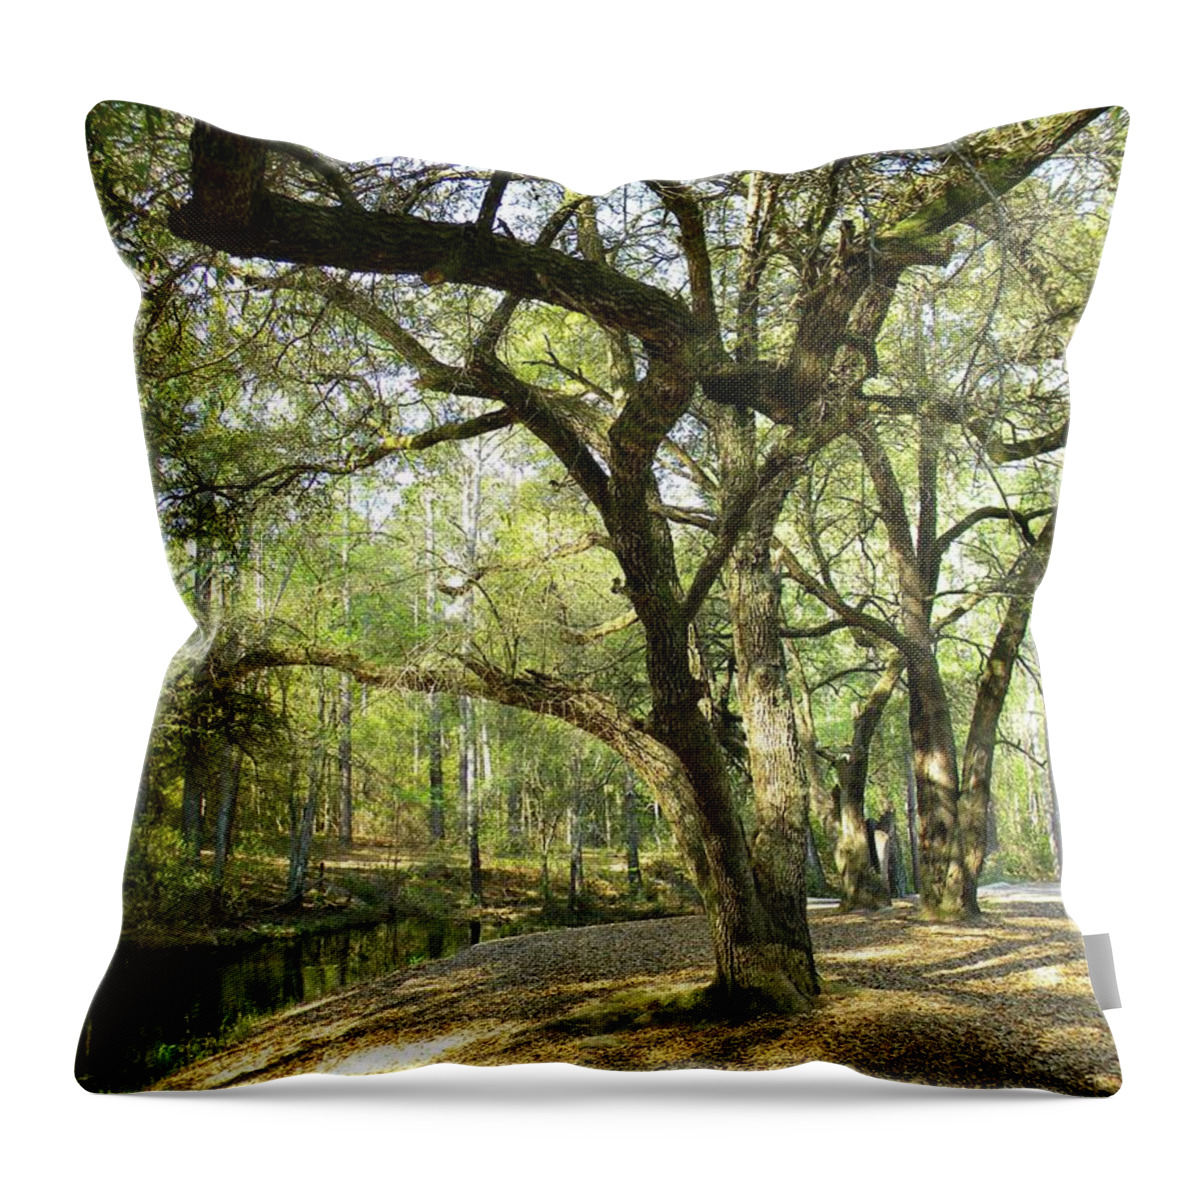 South Throw Pillow featuring the photograph Southern Charm by Matthew Seufer